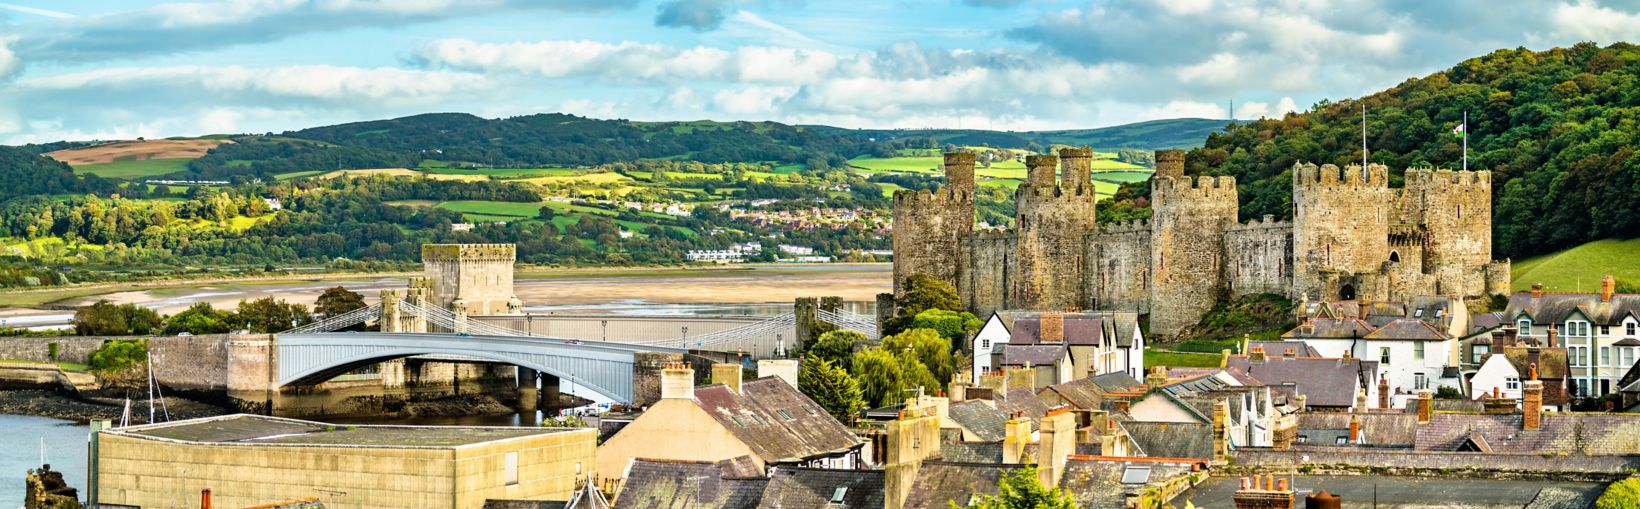 Panorama of Conwy with Conwy Castle. UNESCO world heritage in Wales, United Kingdom